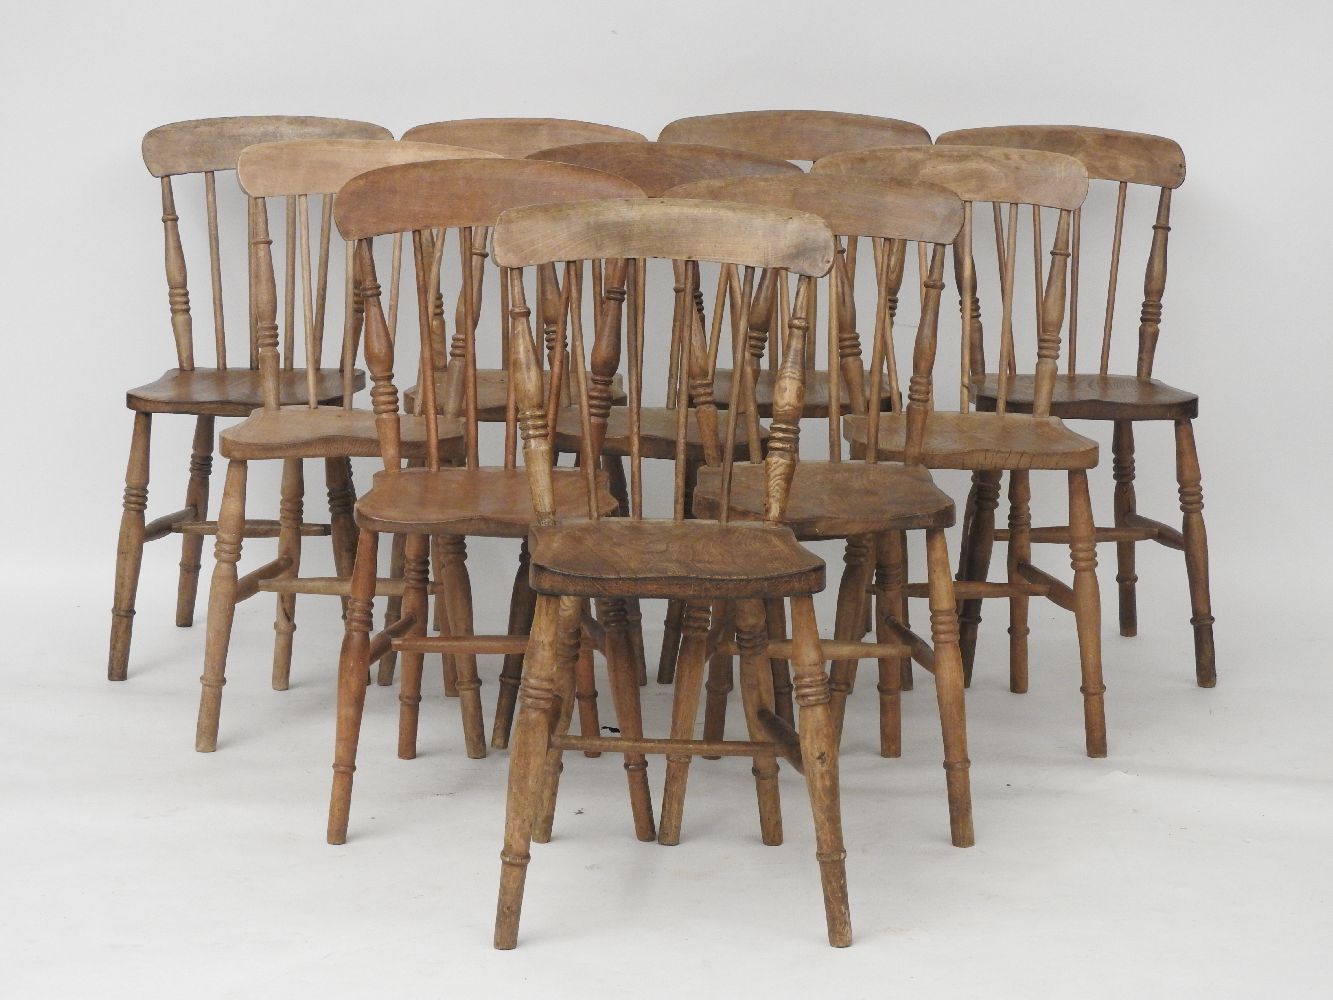 Ten matched spindle back kitchen chairs